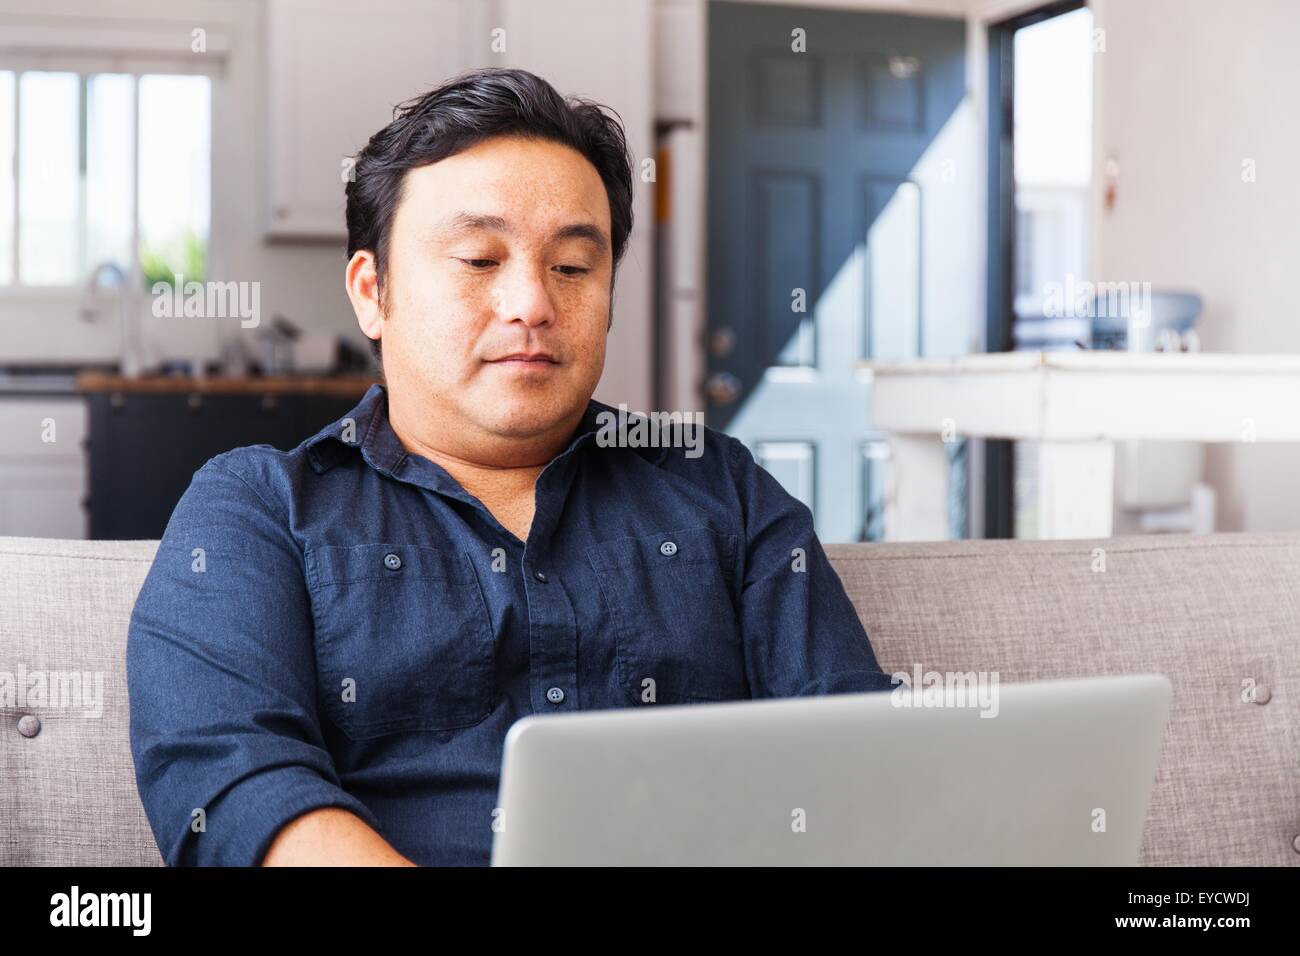 Man working on laptop on sofa Banque D'Images